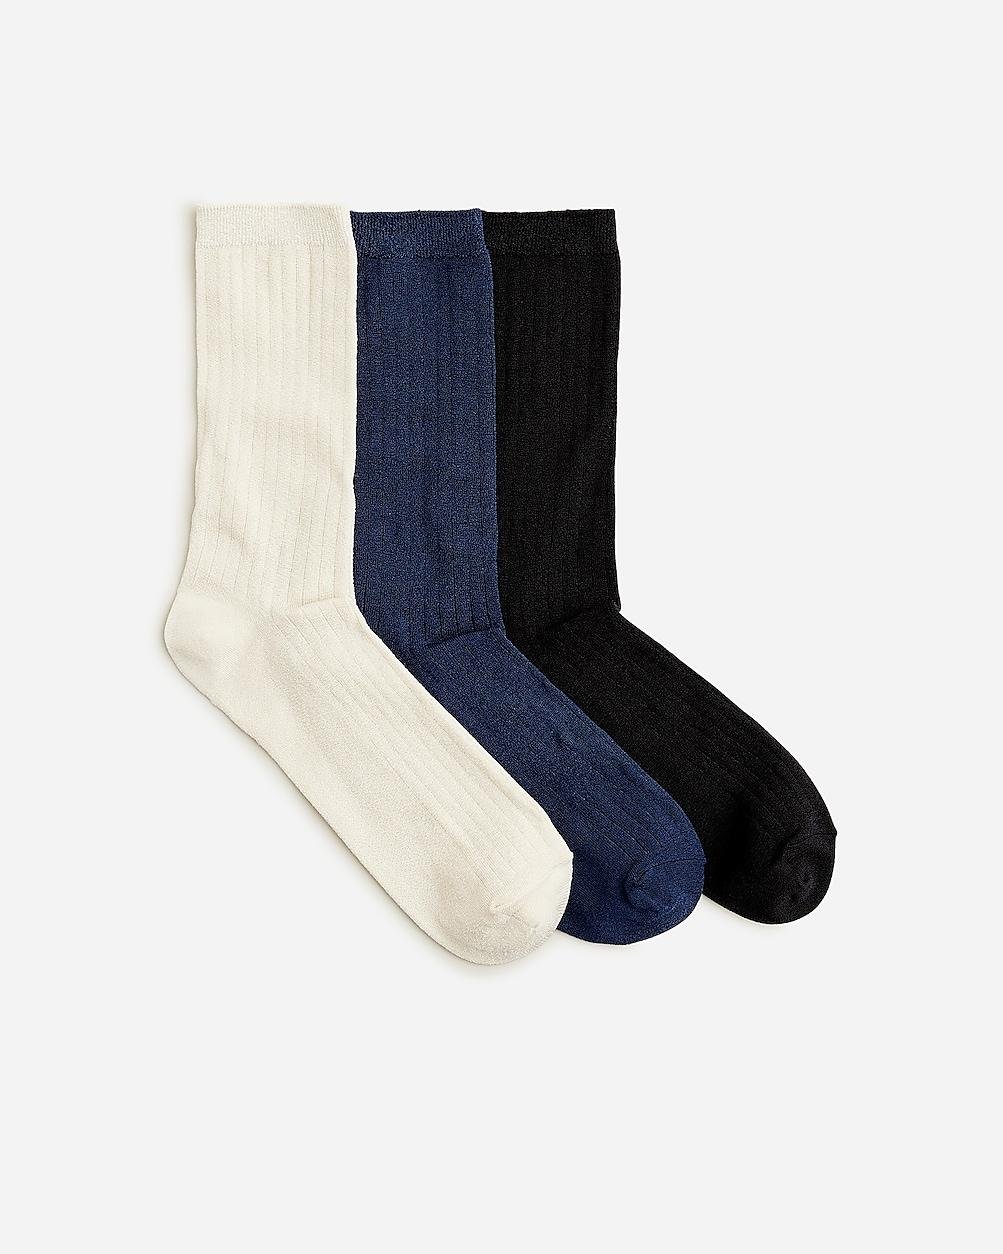 Ribbed trouser socks three-pack by J.CREW